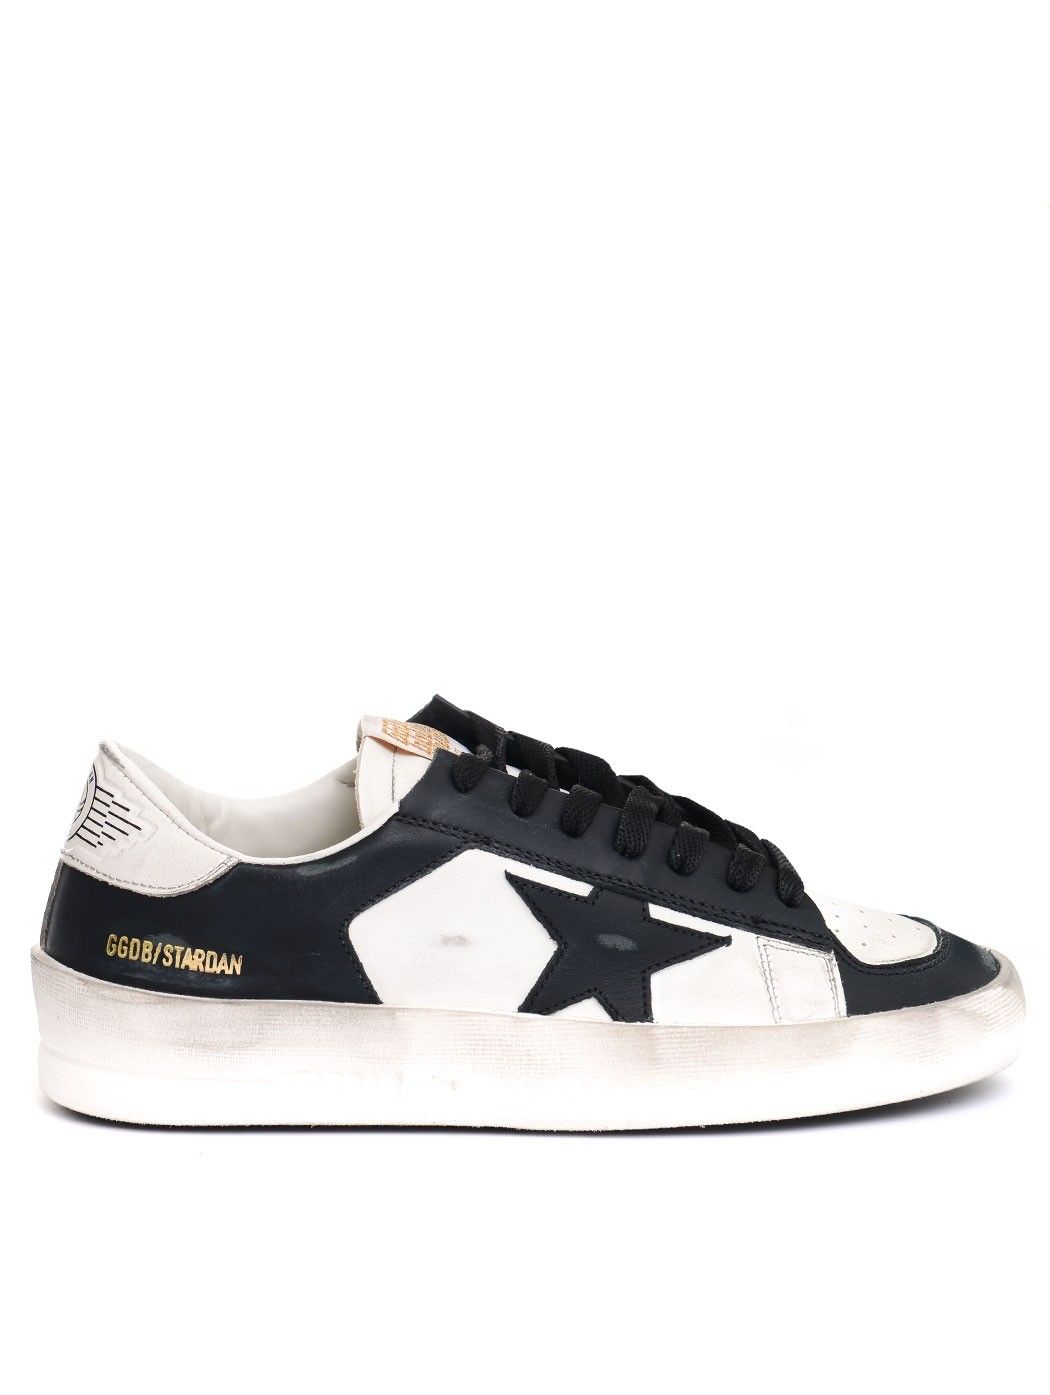  WOMAN SHOES,MARNI SHOES,GOLDEN GOOSE SNEAKERS,GOLDEN GOOSE SHOES,GIVENCHY SHOES,GIVENCHY SANDALS,MARNI SNEAKERS  GOLDEN GOOSE GWF00128